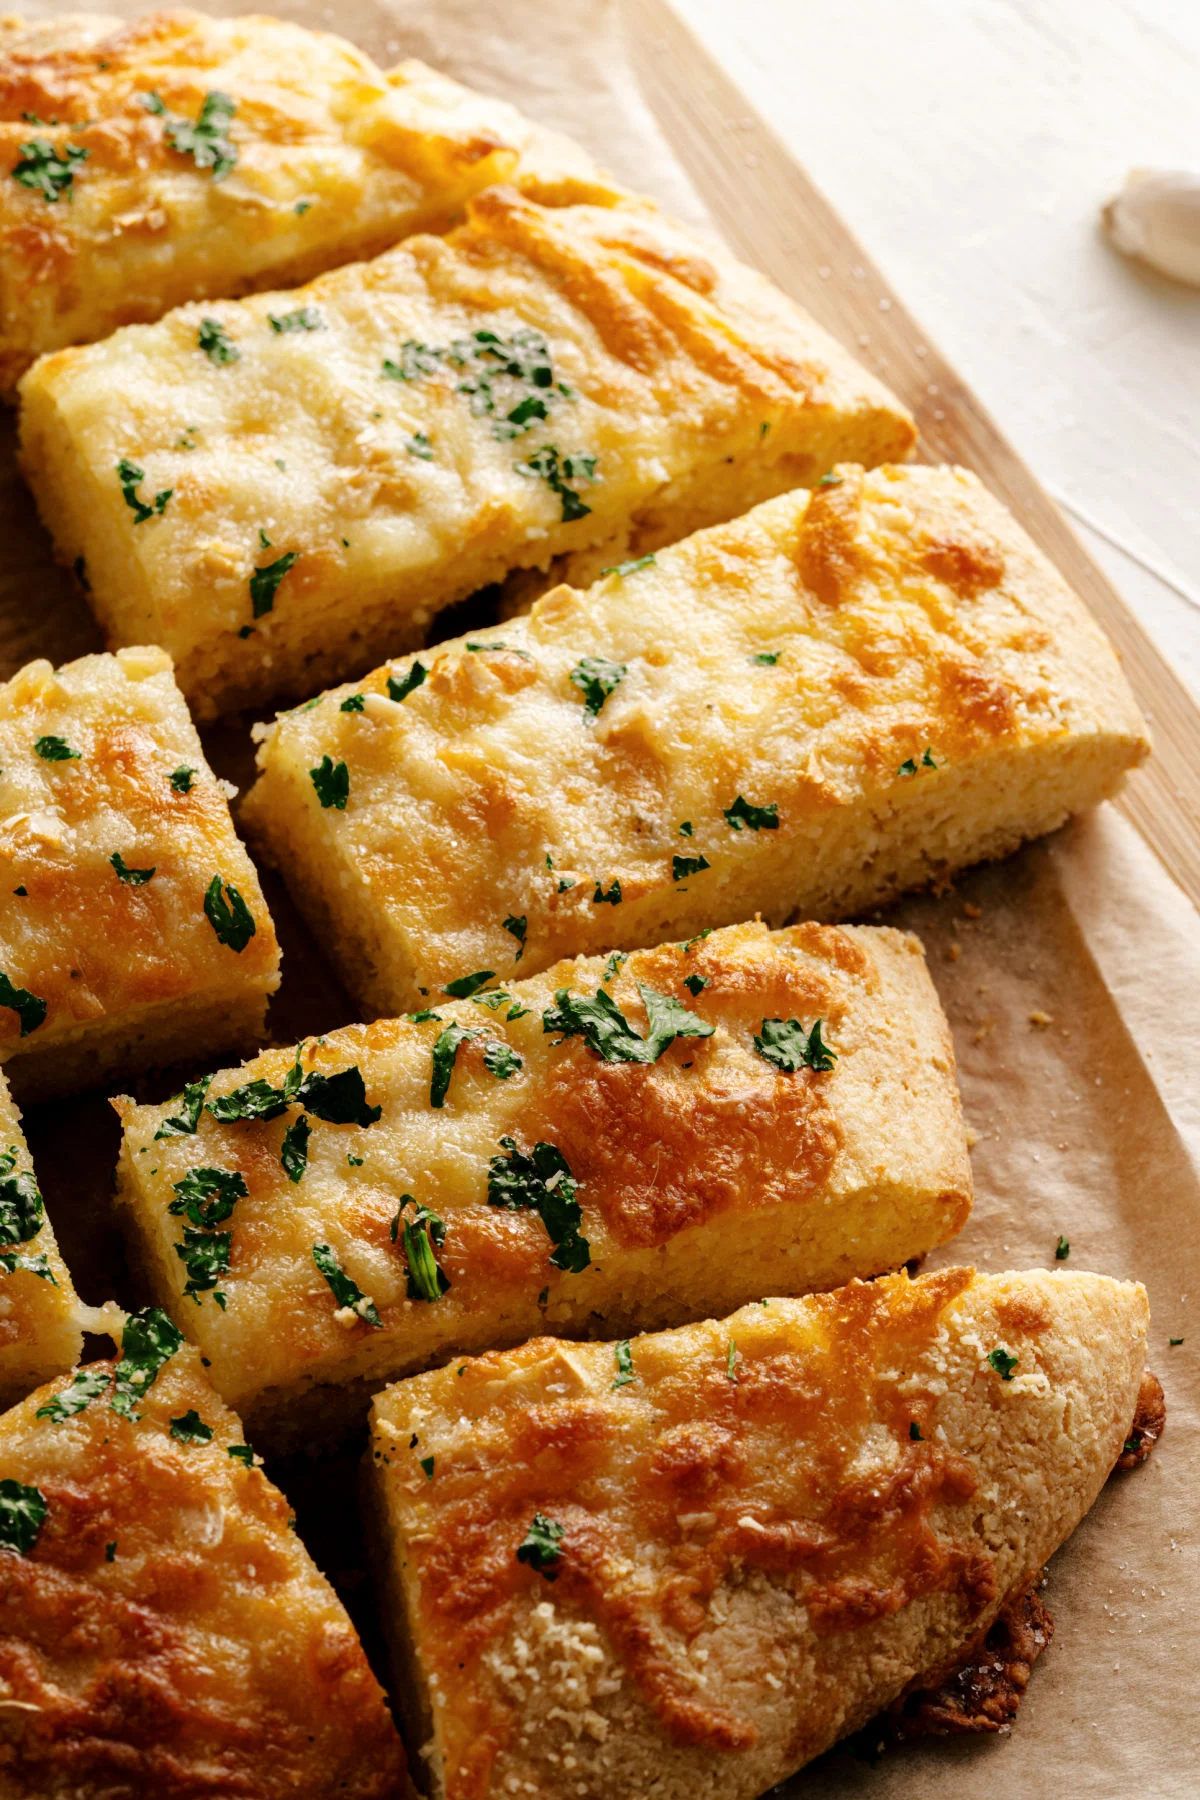 Parchment paper with gluten free garlic bread cut into pieces.